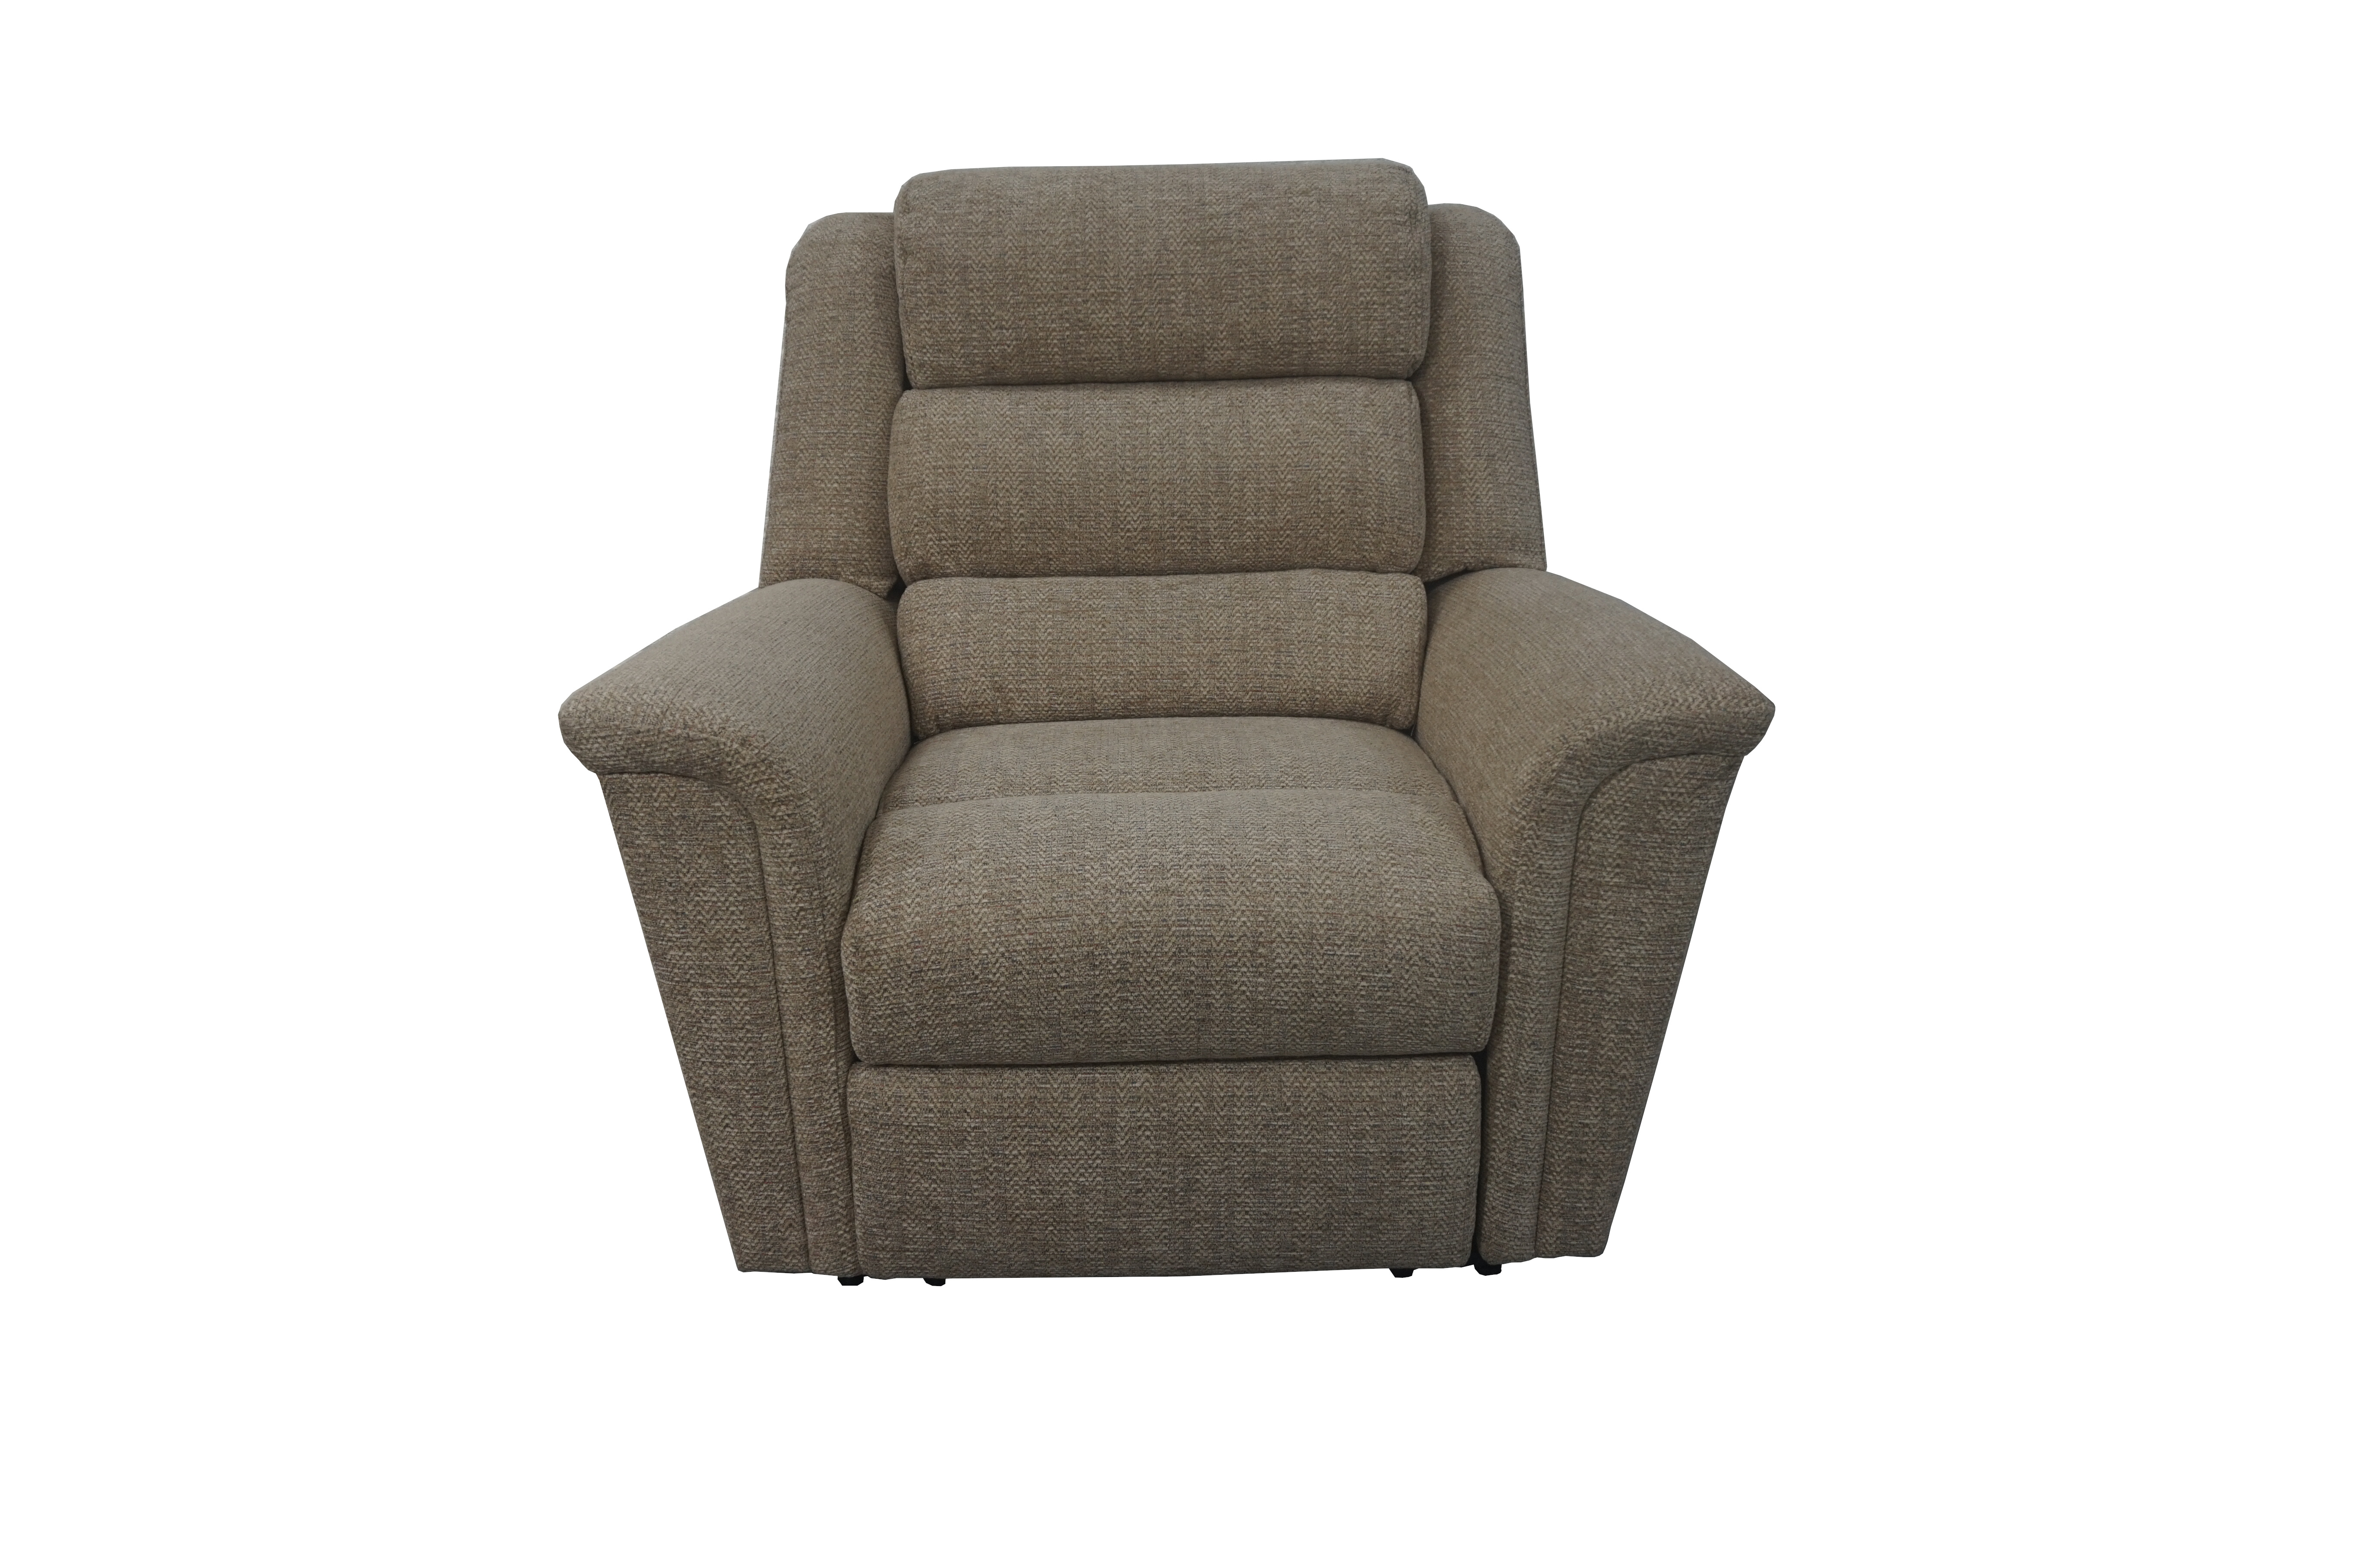 Parker Knoll Colorado Power Recliner Armchair with USB Port - OUTLET